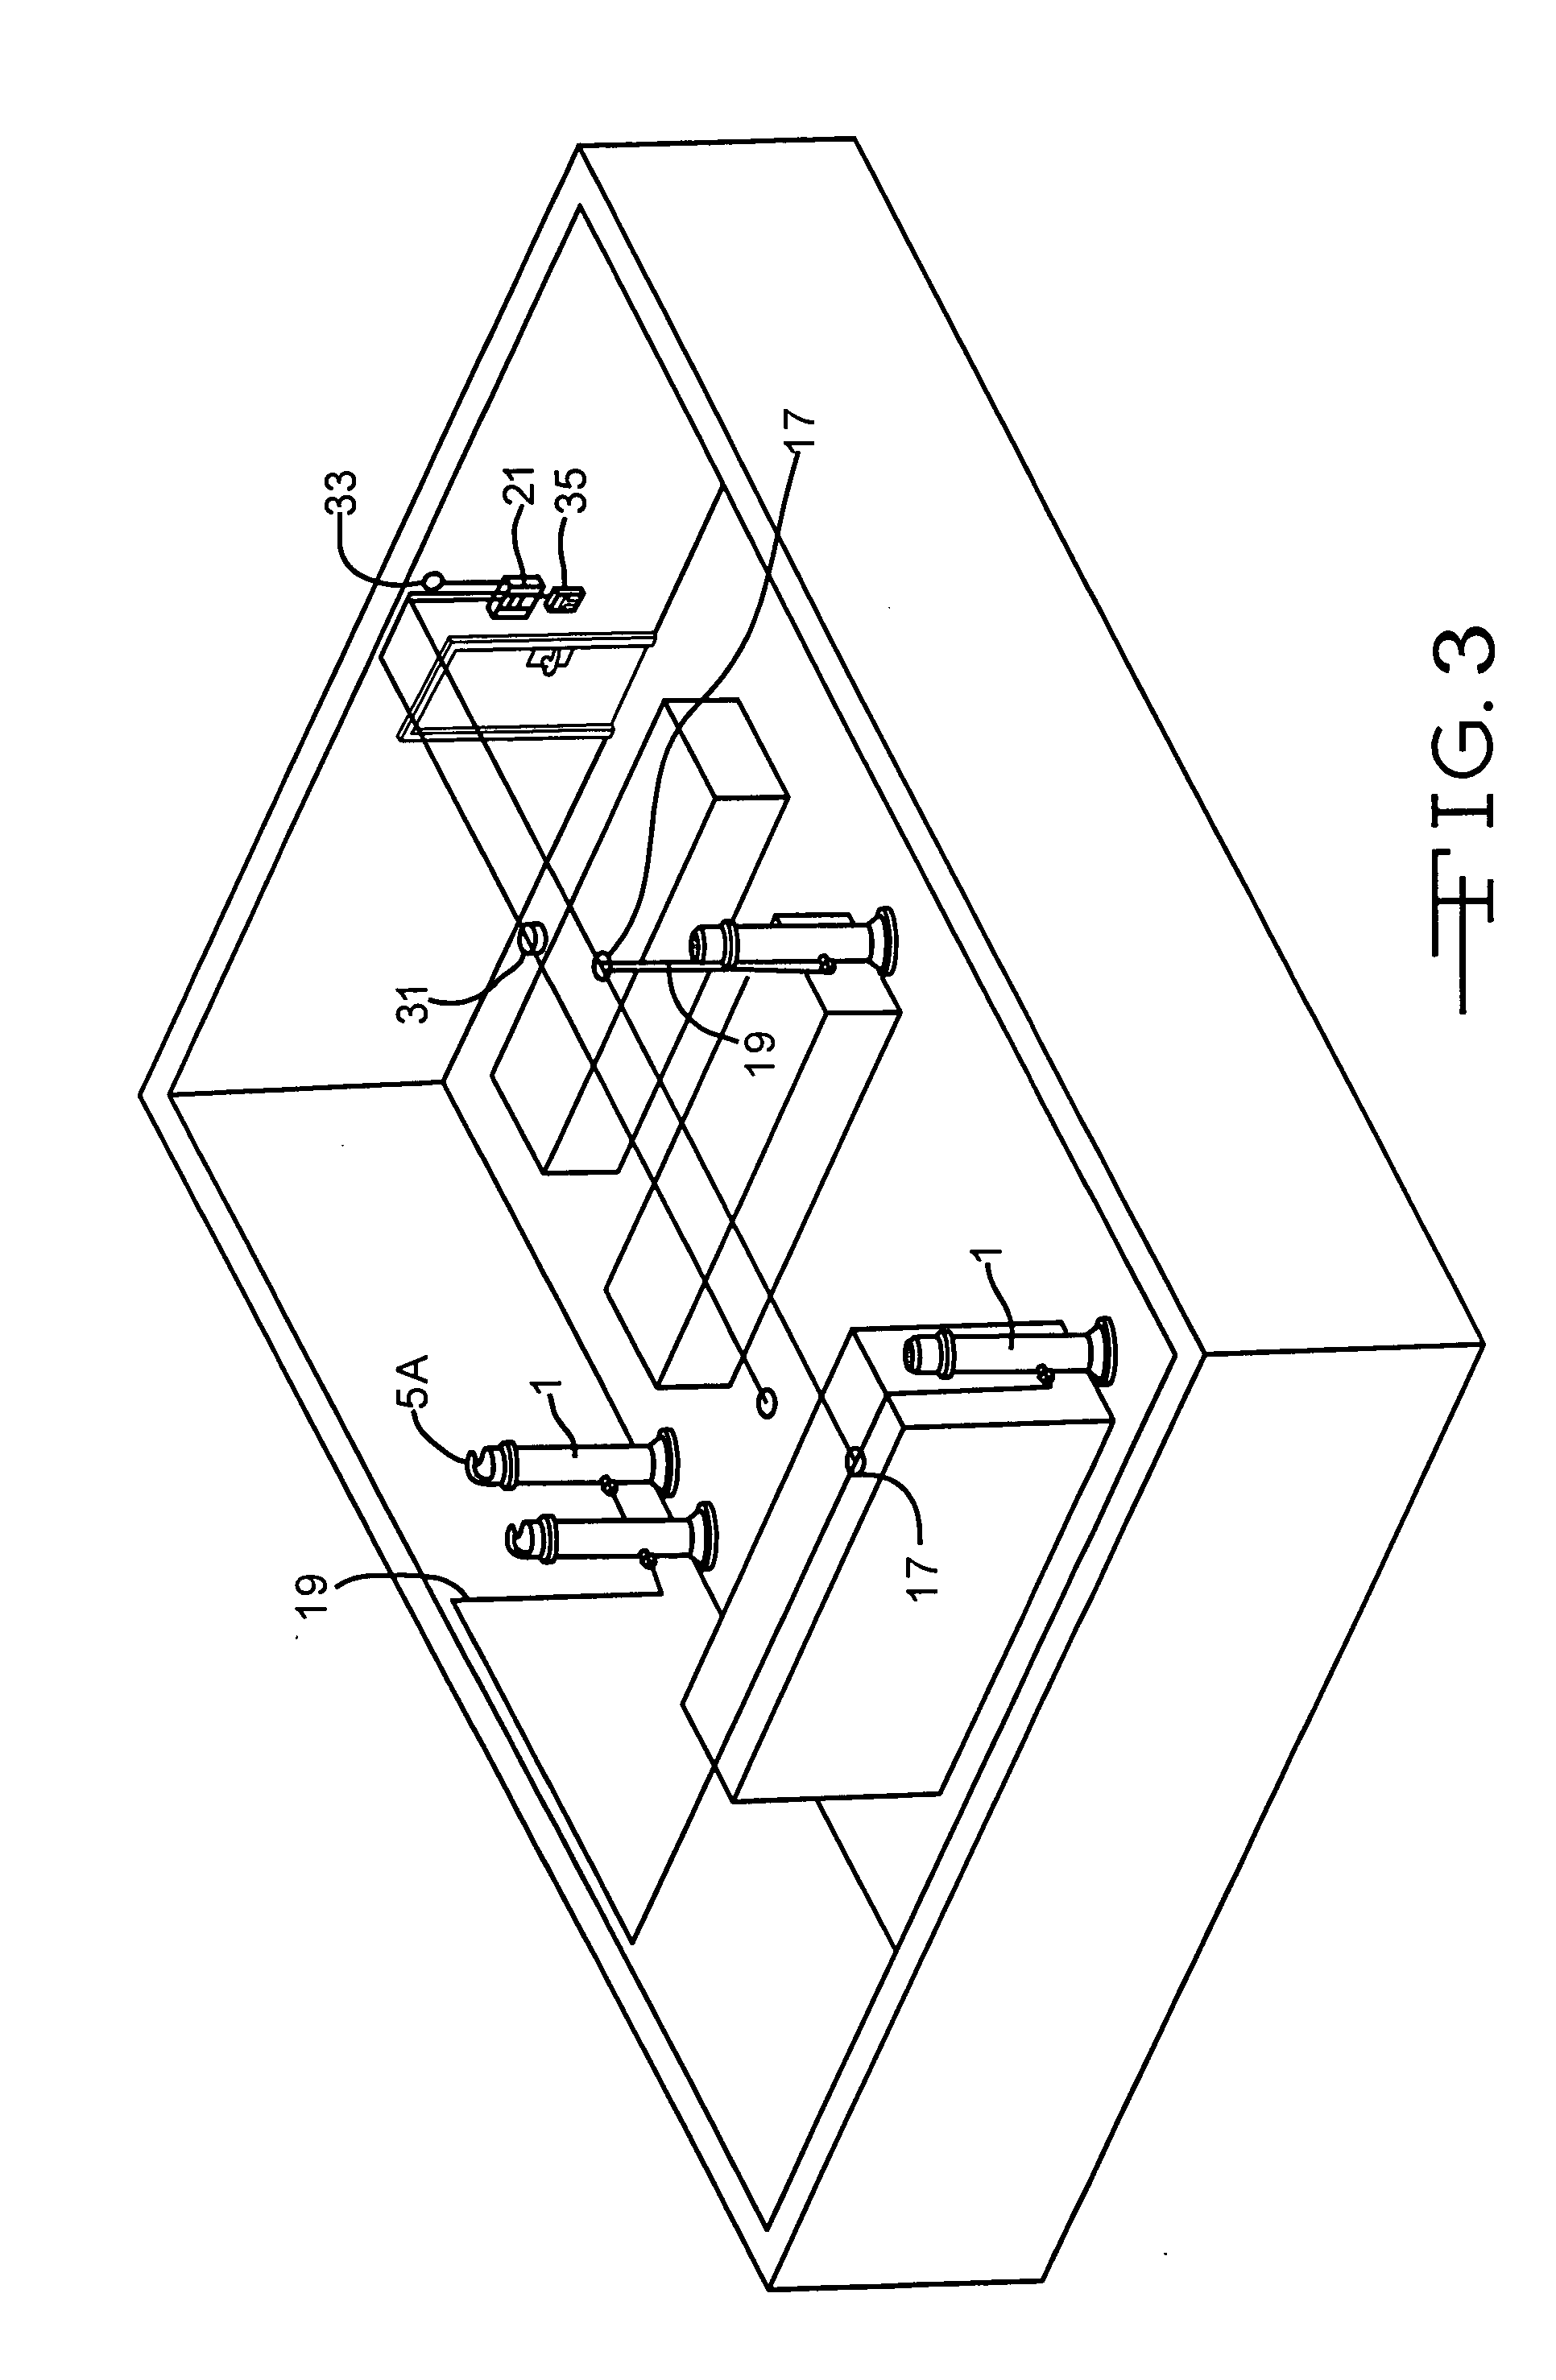 System and method for suppressing fires